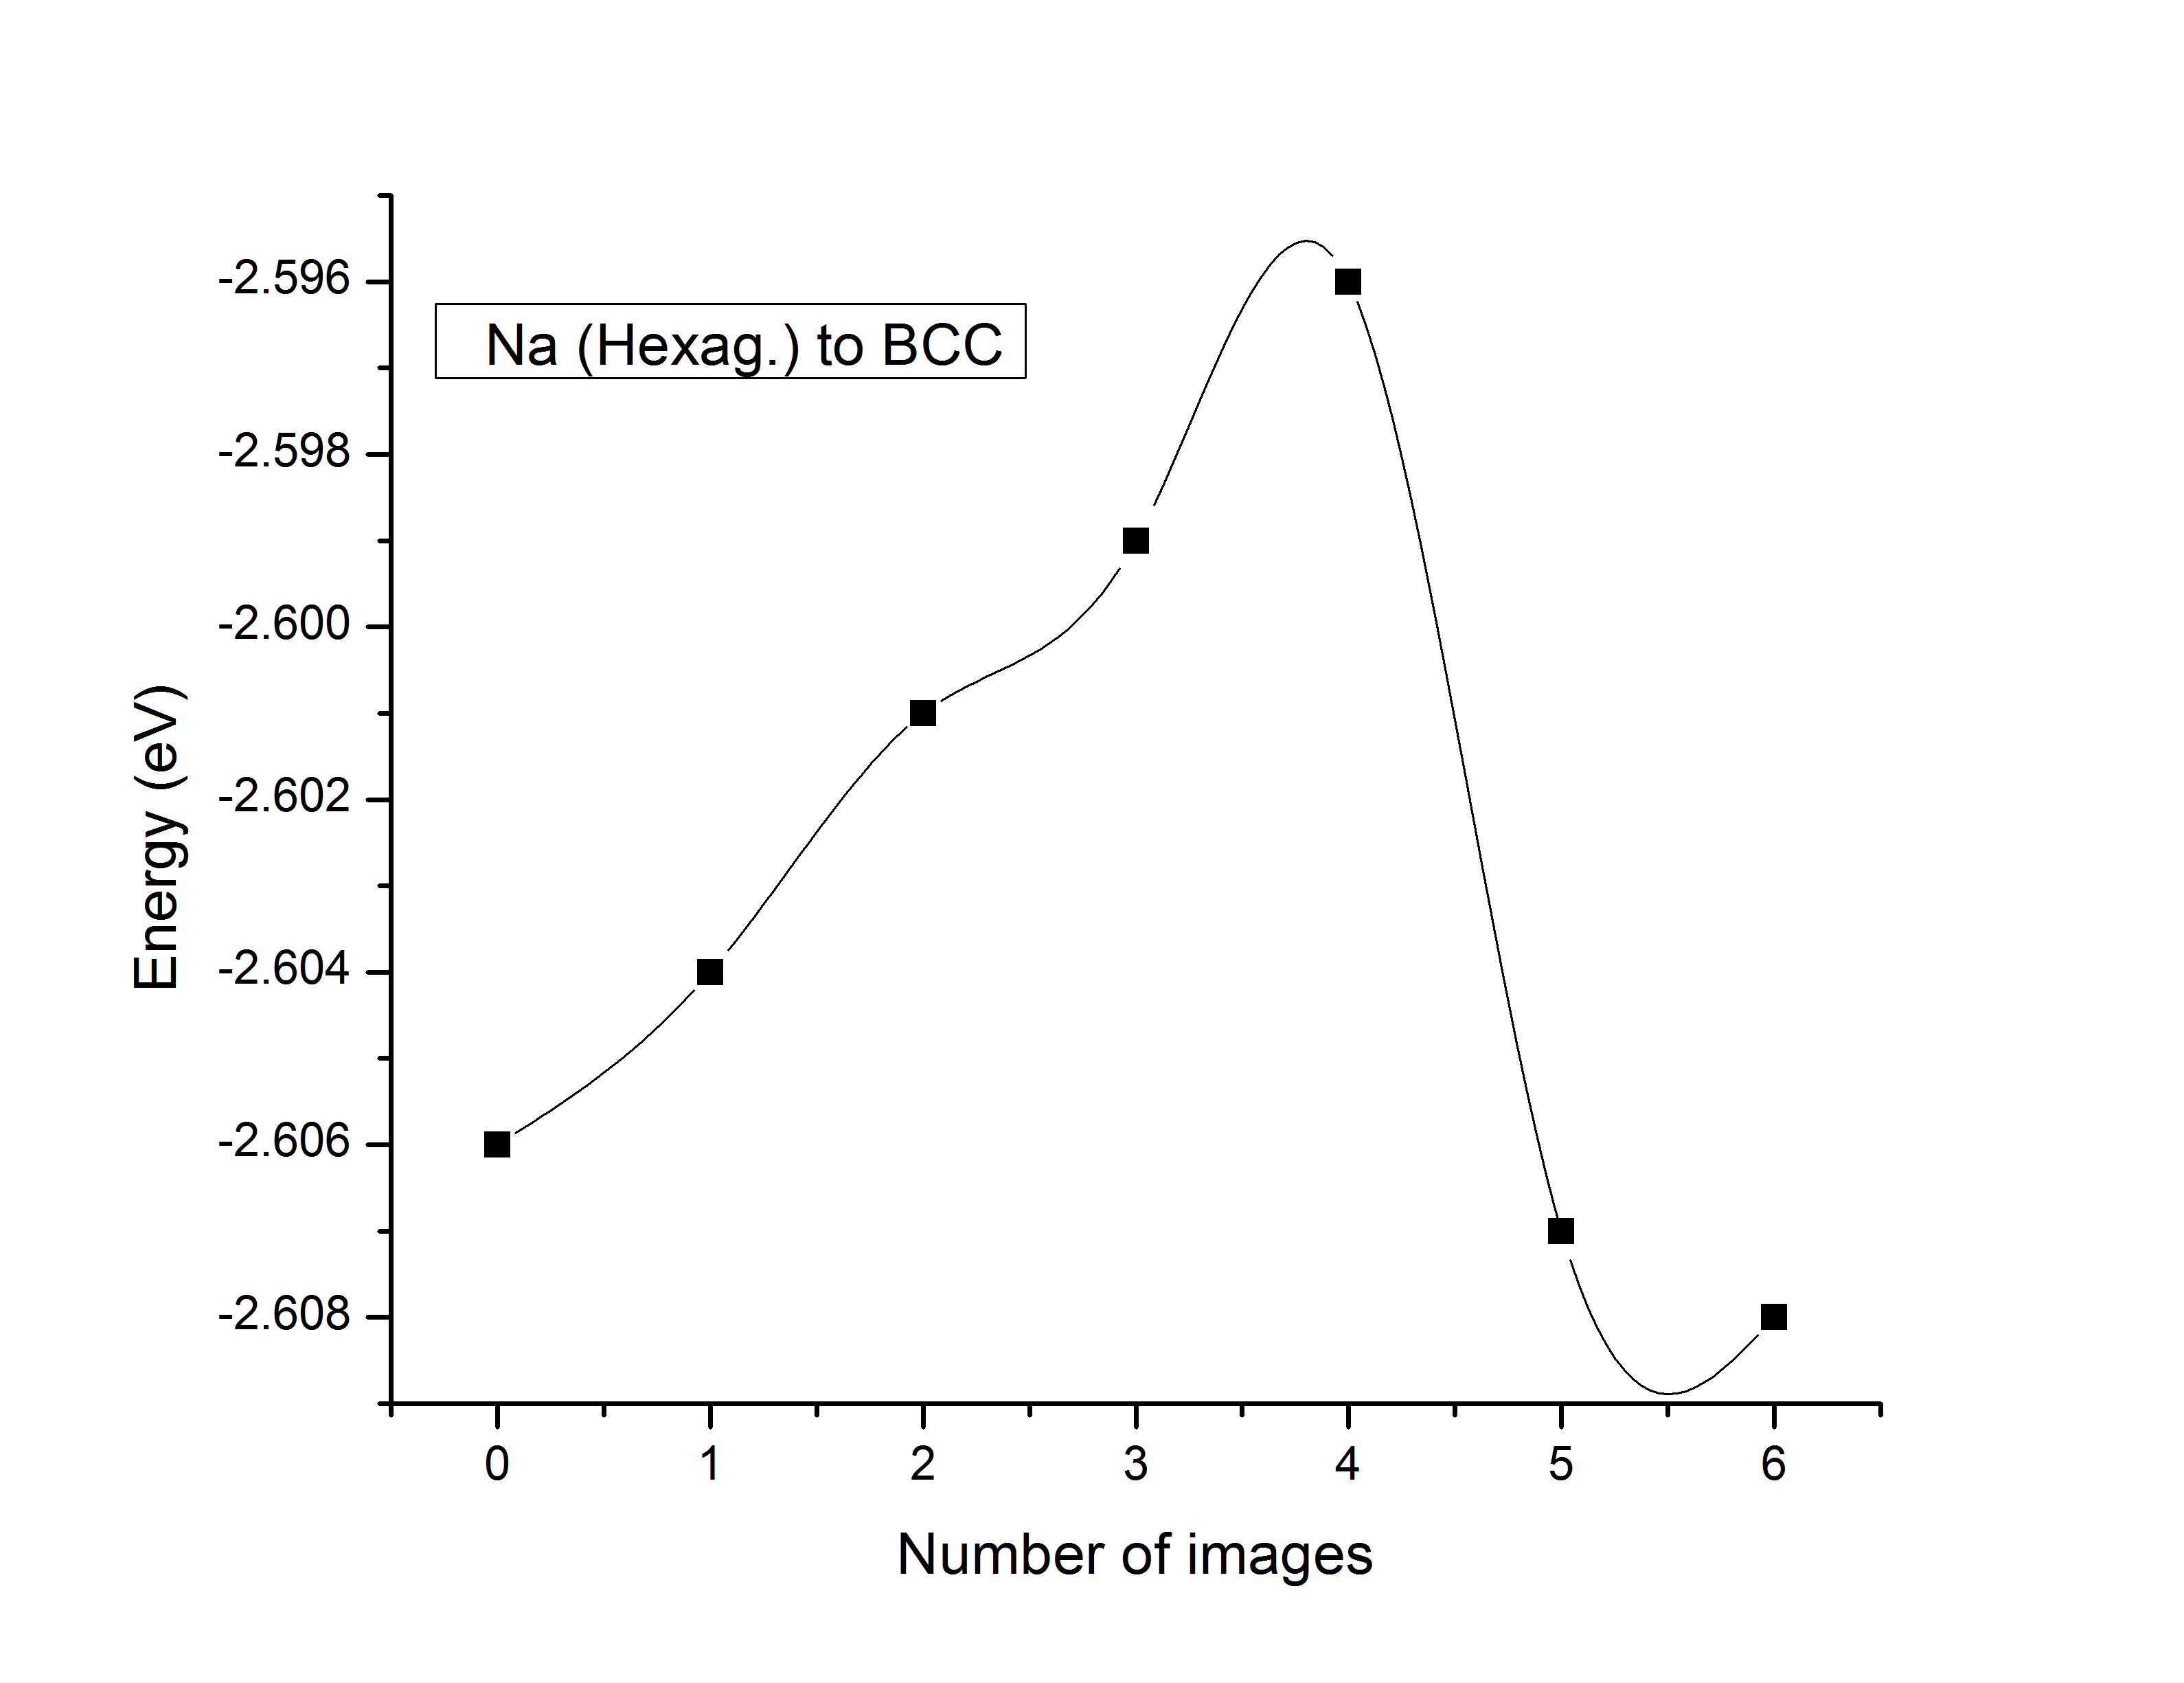 Graph between Number of images and  energies